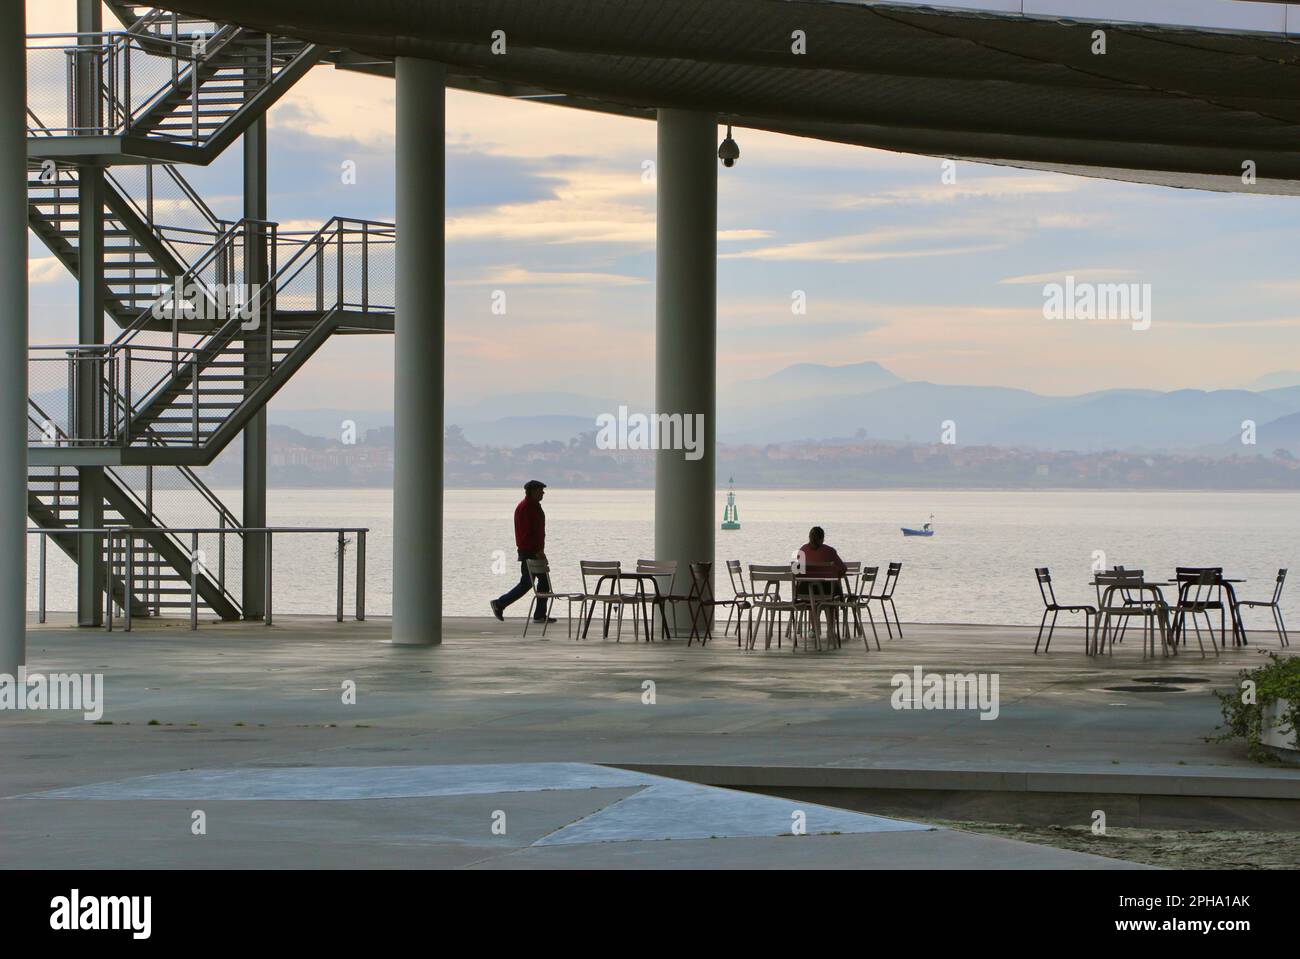 A man walking passing by a woman having breakfast at the open air terrace of the cafe Botin Arts Centre next to Santander Bay Cantabria Spain Stock Photo